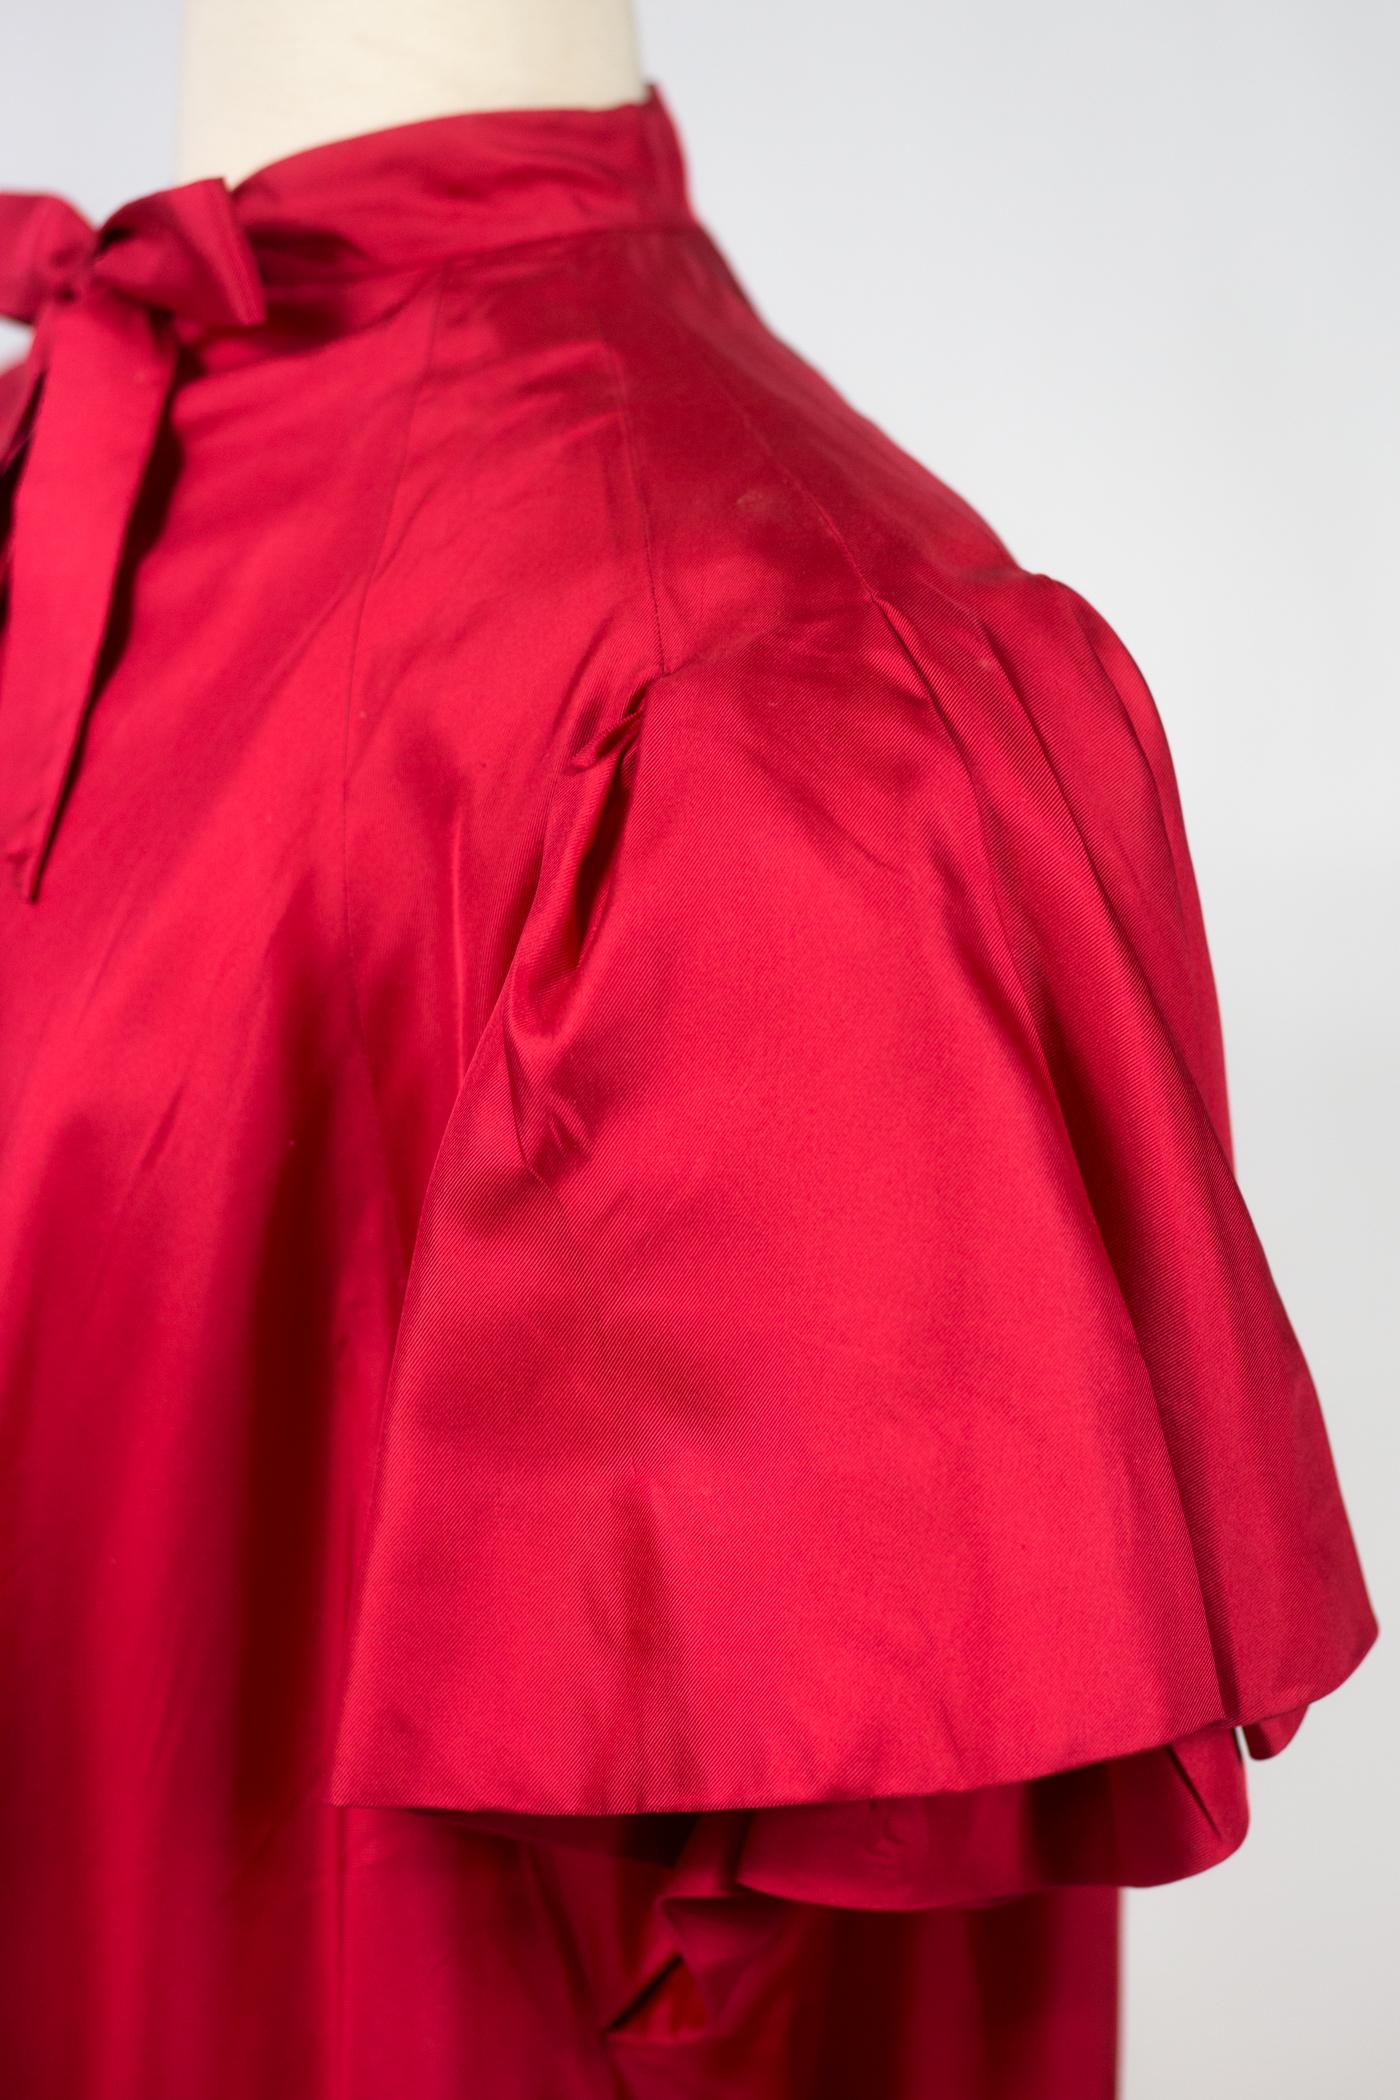 An Evening Maggy Rouff French Haute Couture Red Silk Coat Circa 1955 2